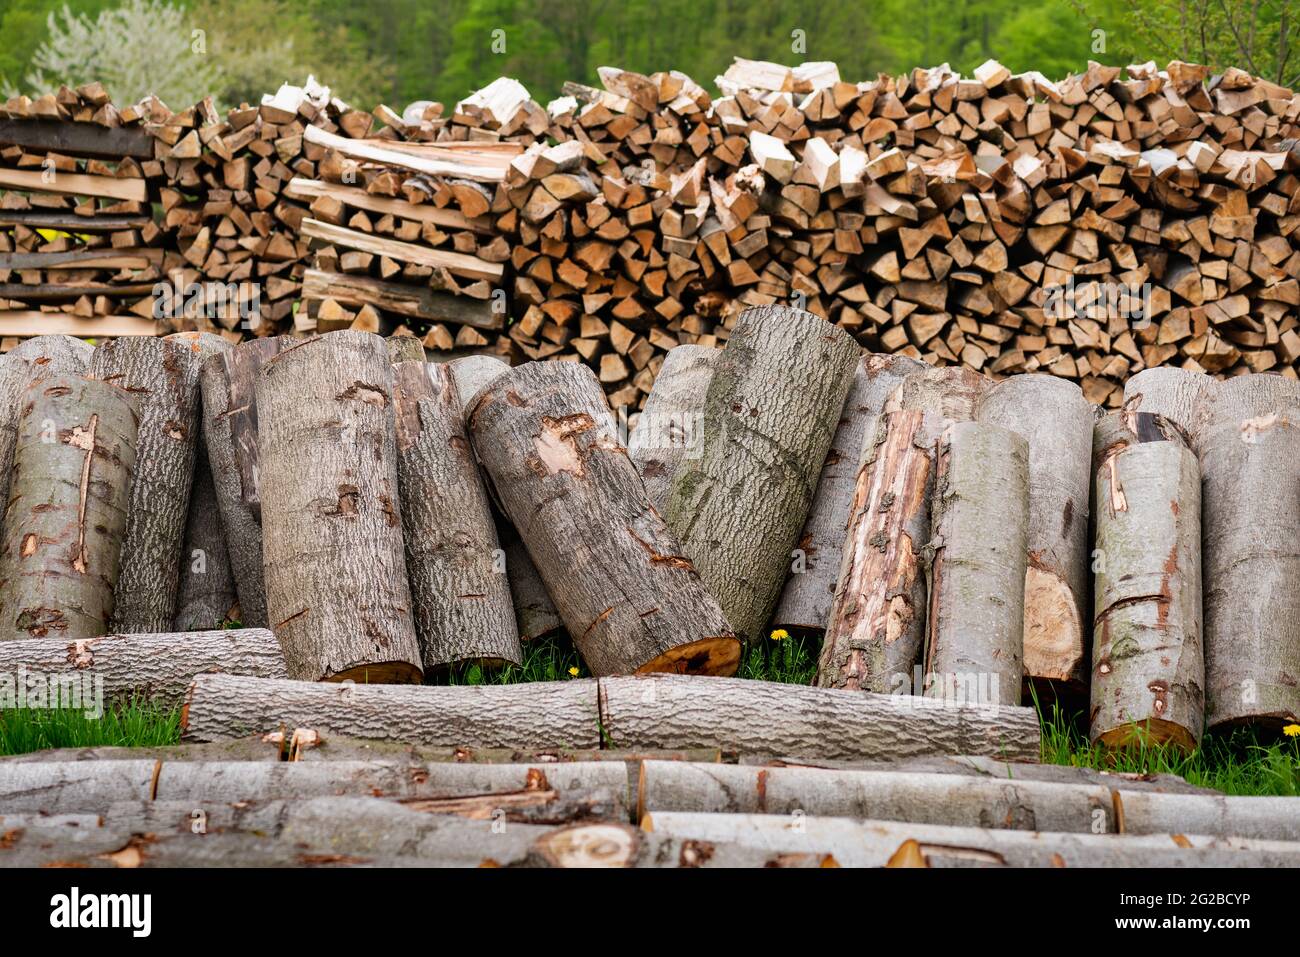 Many sections of logs firewood stacked in the open air. Log trunks pile, the logging timber forest wood industry. Stock Photo